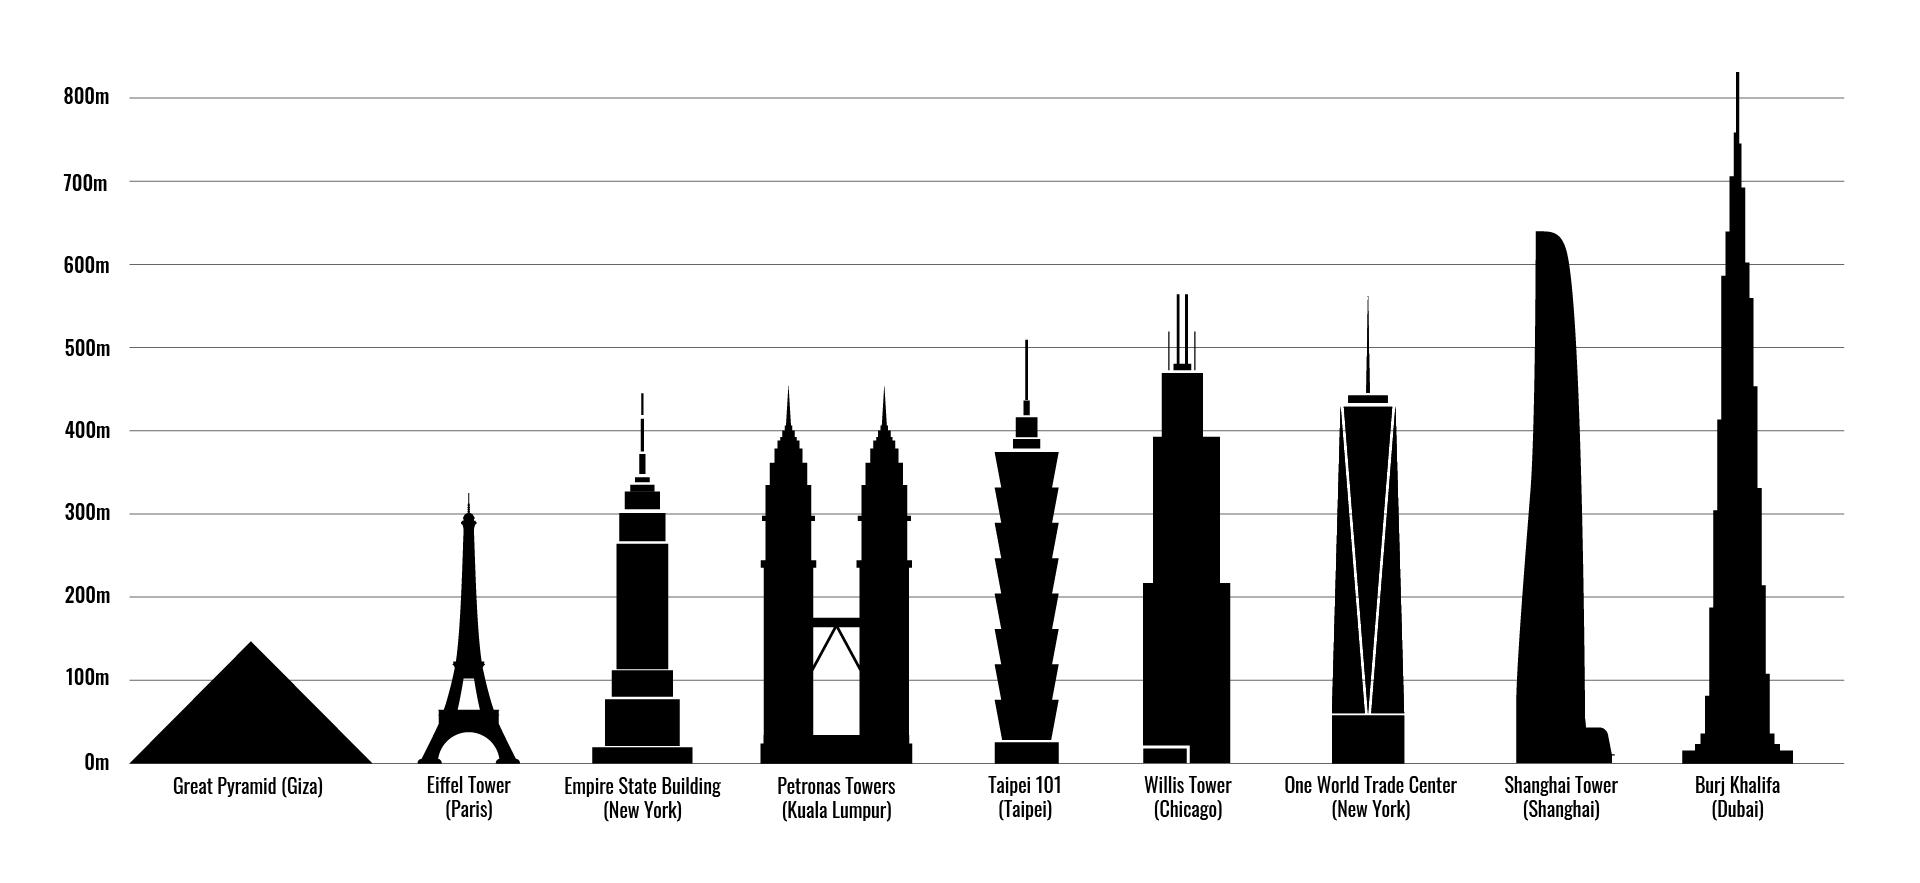 Comparison of global tall buildings